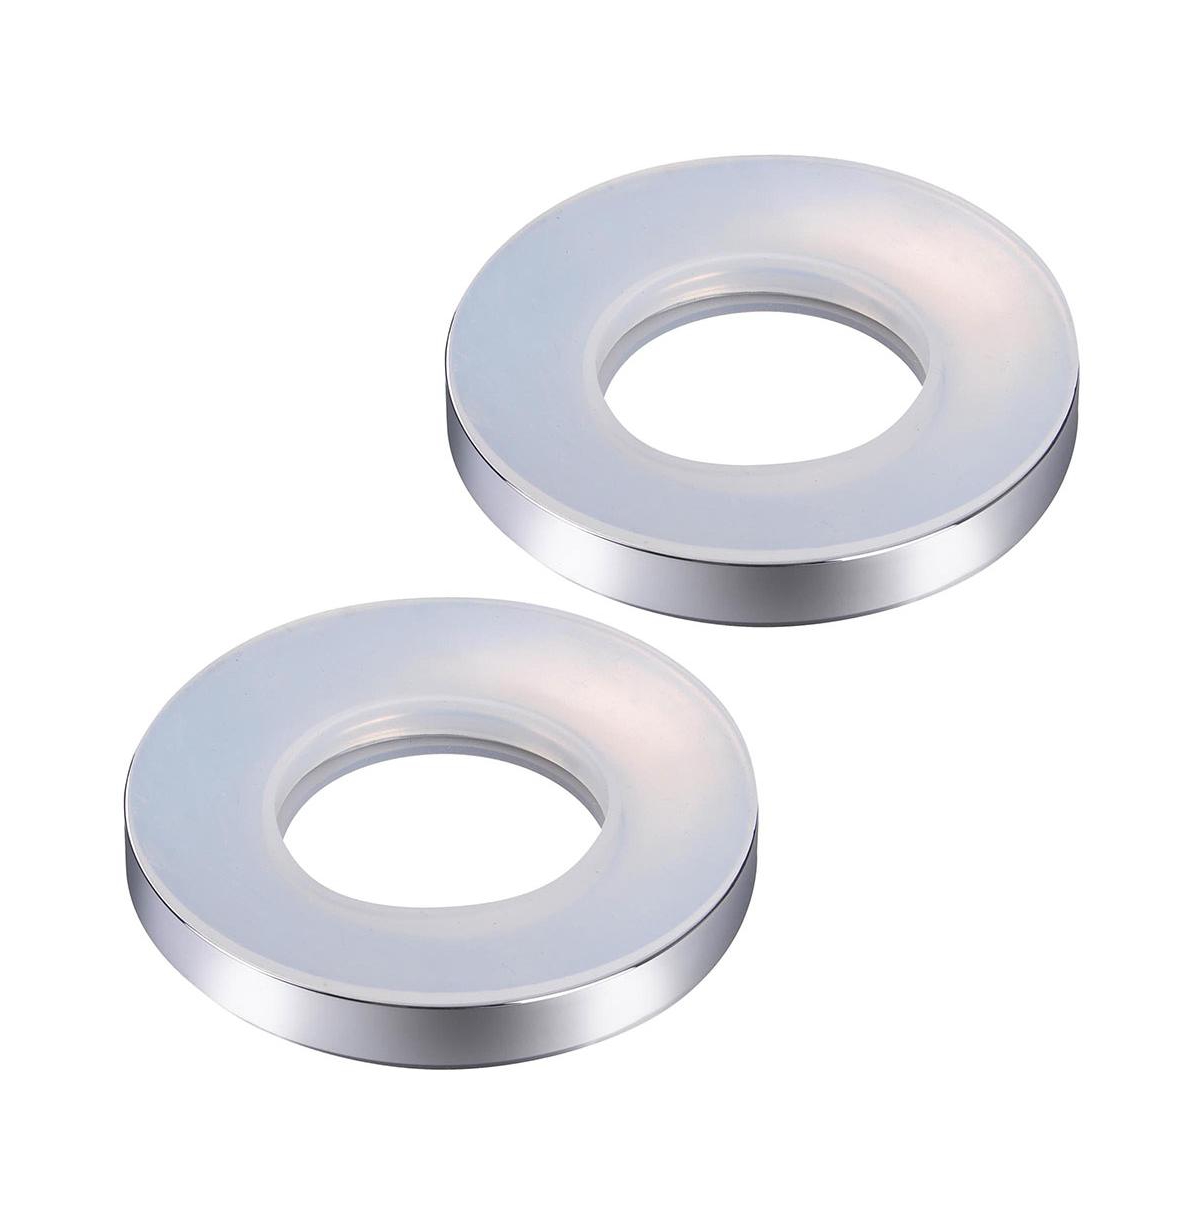 Aquaterior Bathroom Sink Mounting Ring Chrome Plating for Home Countertop Glass Vessel Sink 2 Pack - Silver